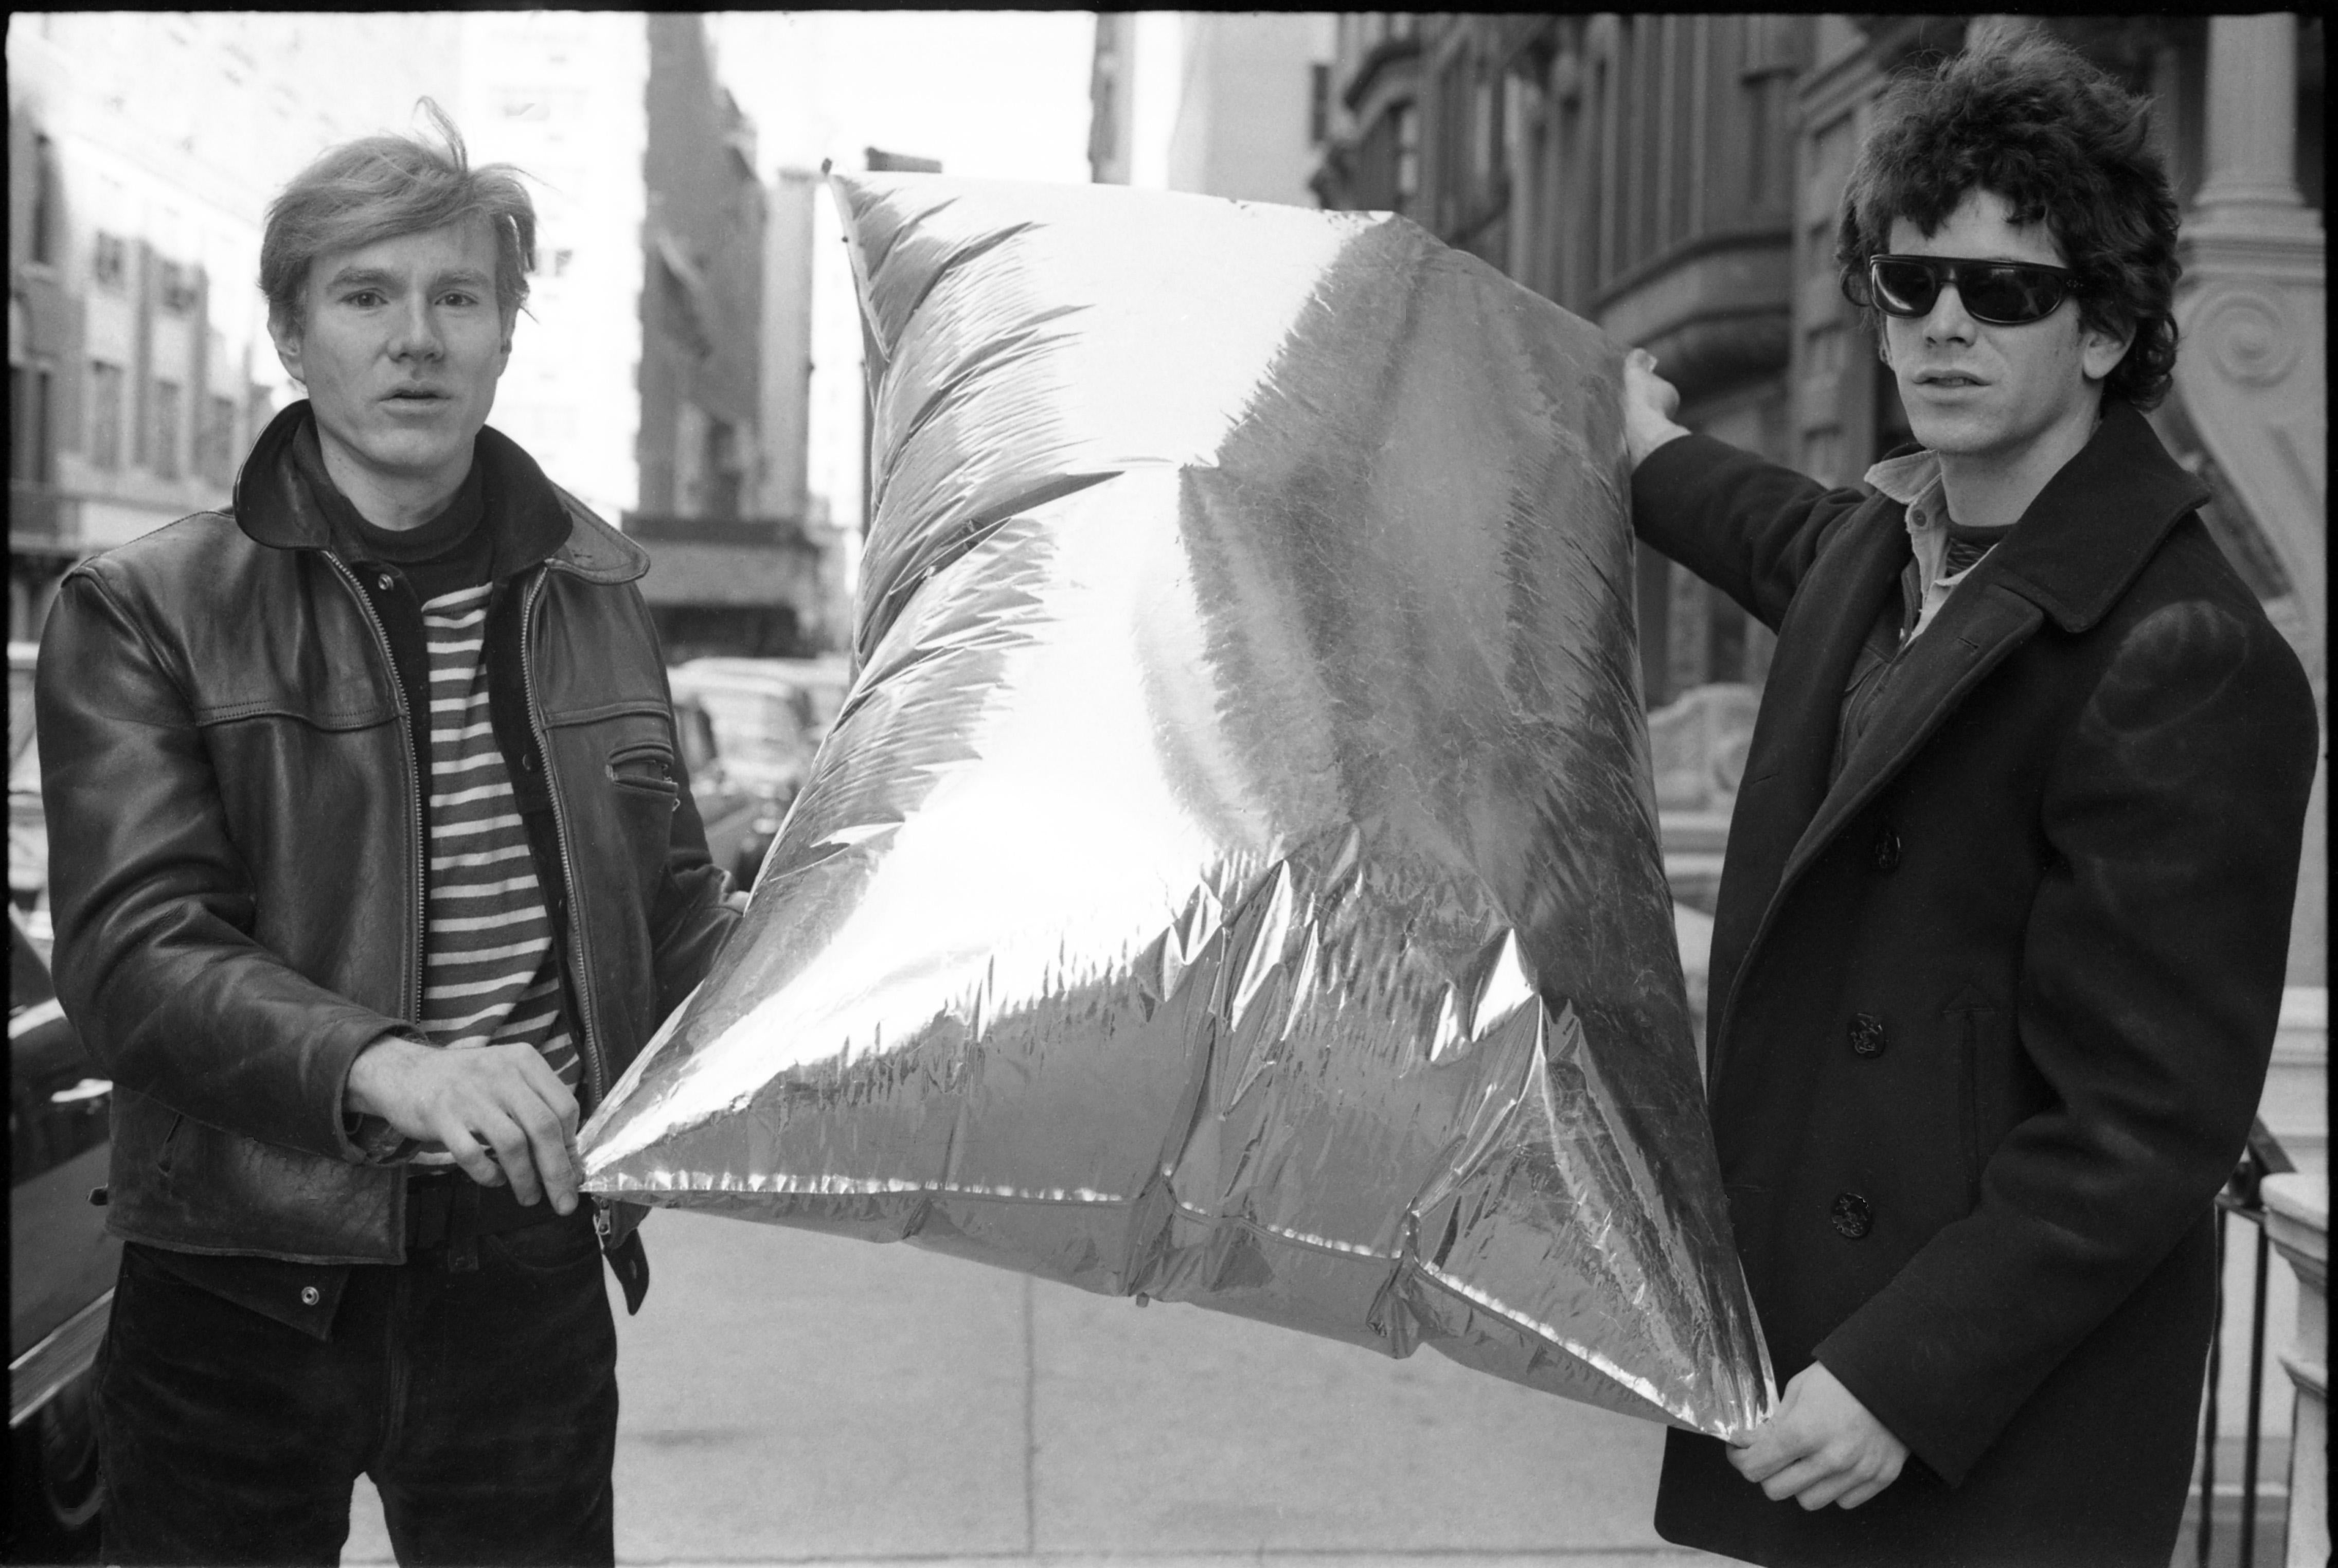 David Gahr Black and White Photograph - Andy Warhol & Lou Reed, Black & White Portrait, Photographed in NYC, March 1966